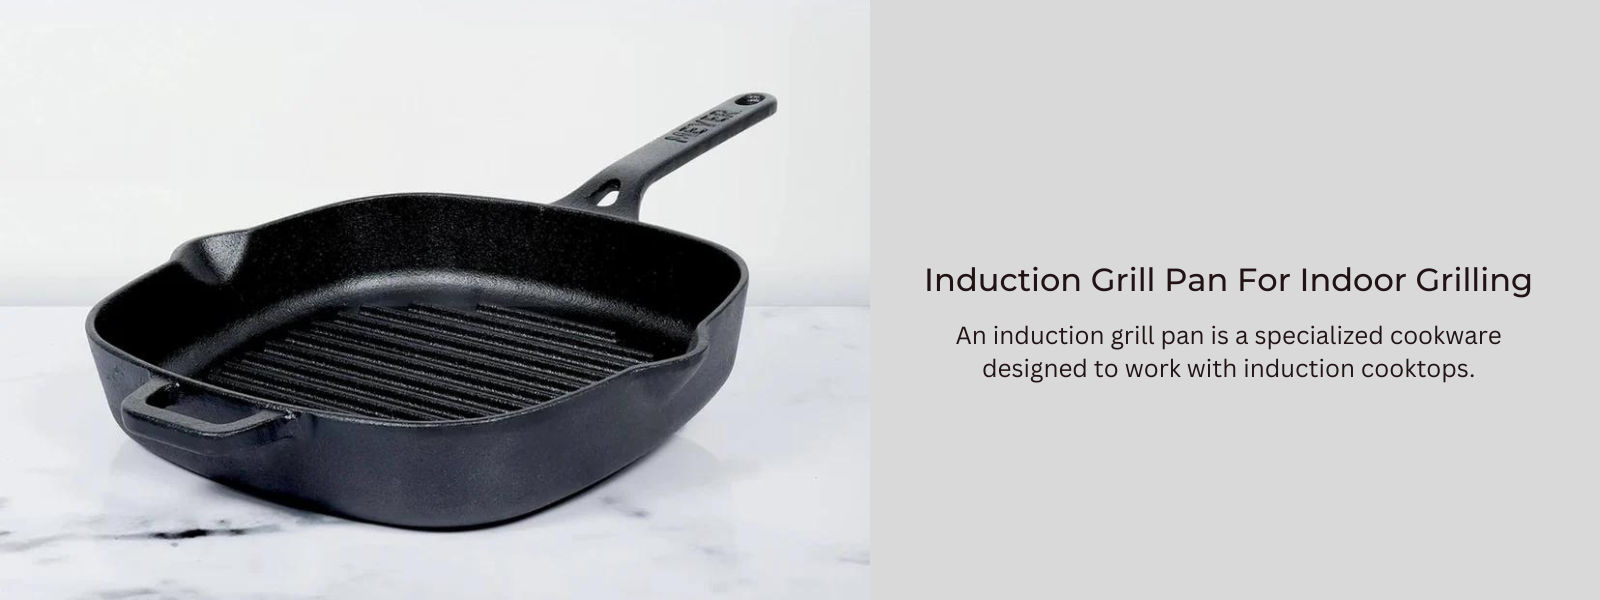 Safe And Sturdy Induction Grill Pan For Indoor Grilling - PotsandPans India